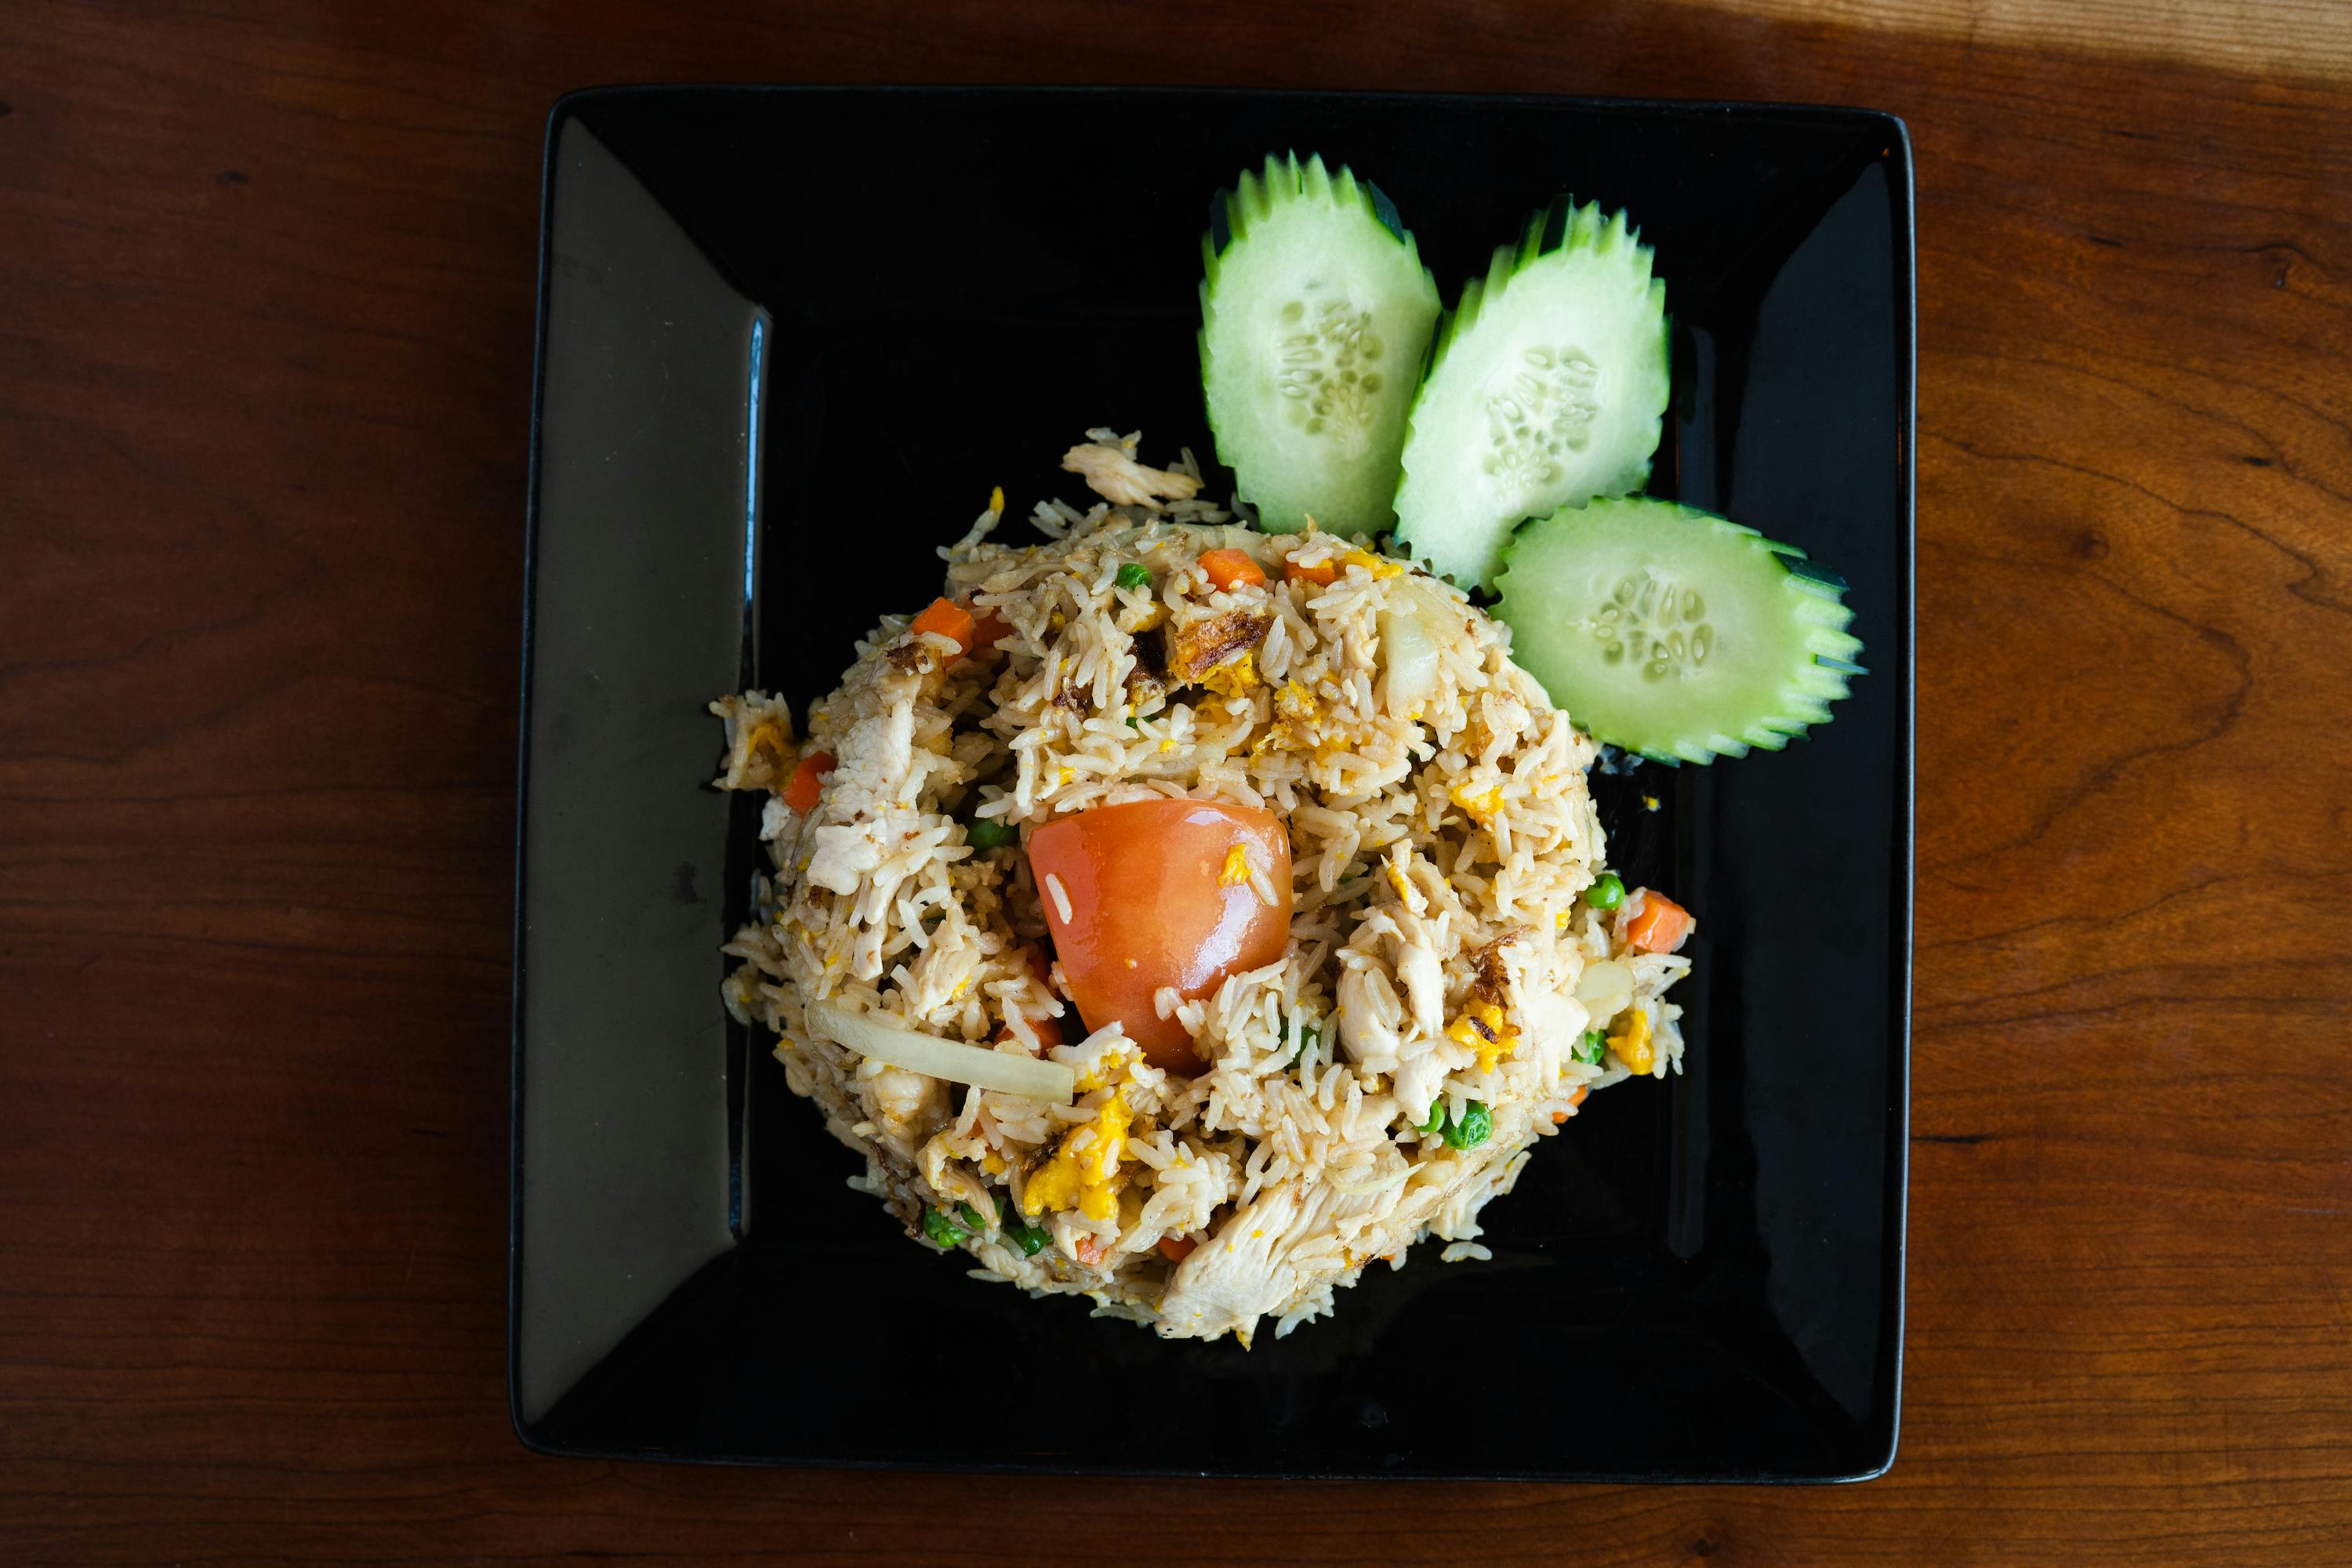 Thai Fried Rice from City Thai Cuisine in Portland, OR